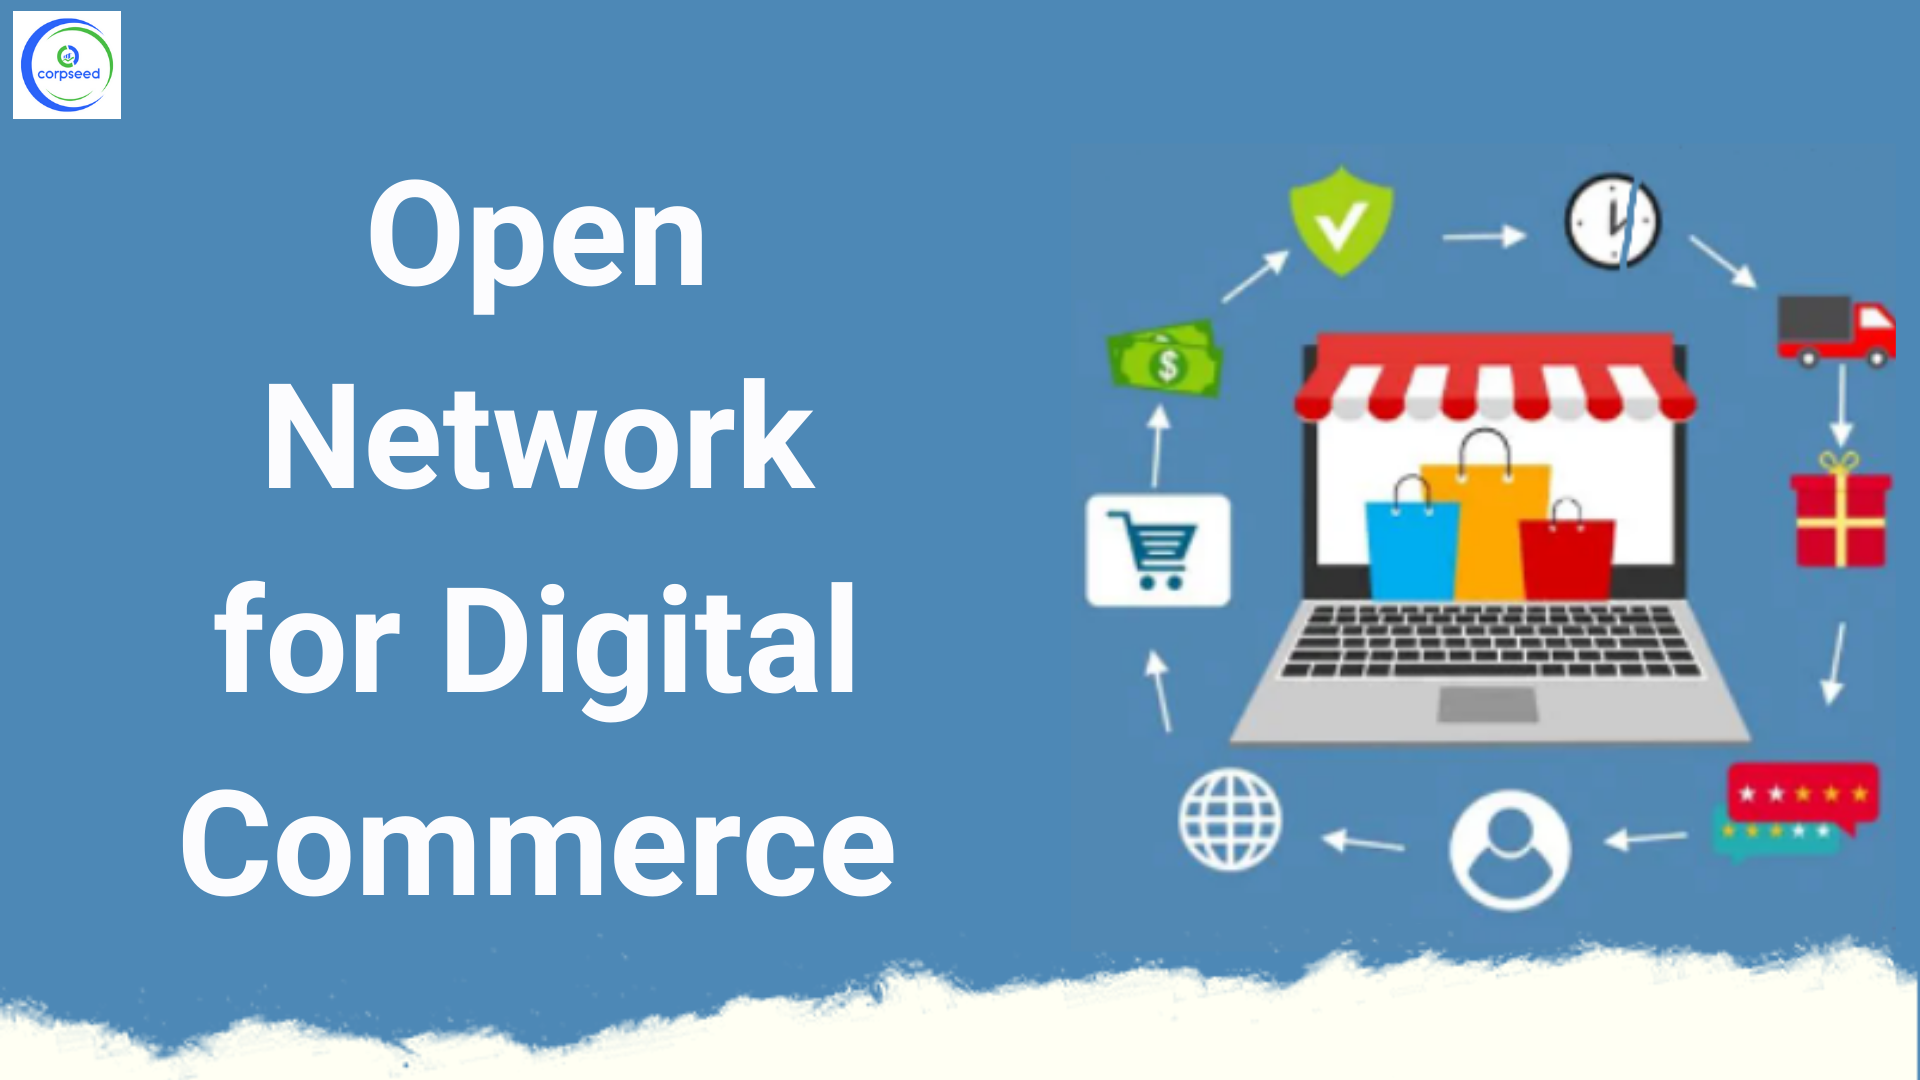 Open_Network_for_Digital_Commerce_Corpseed.png